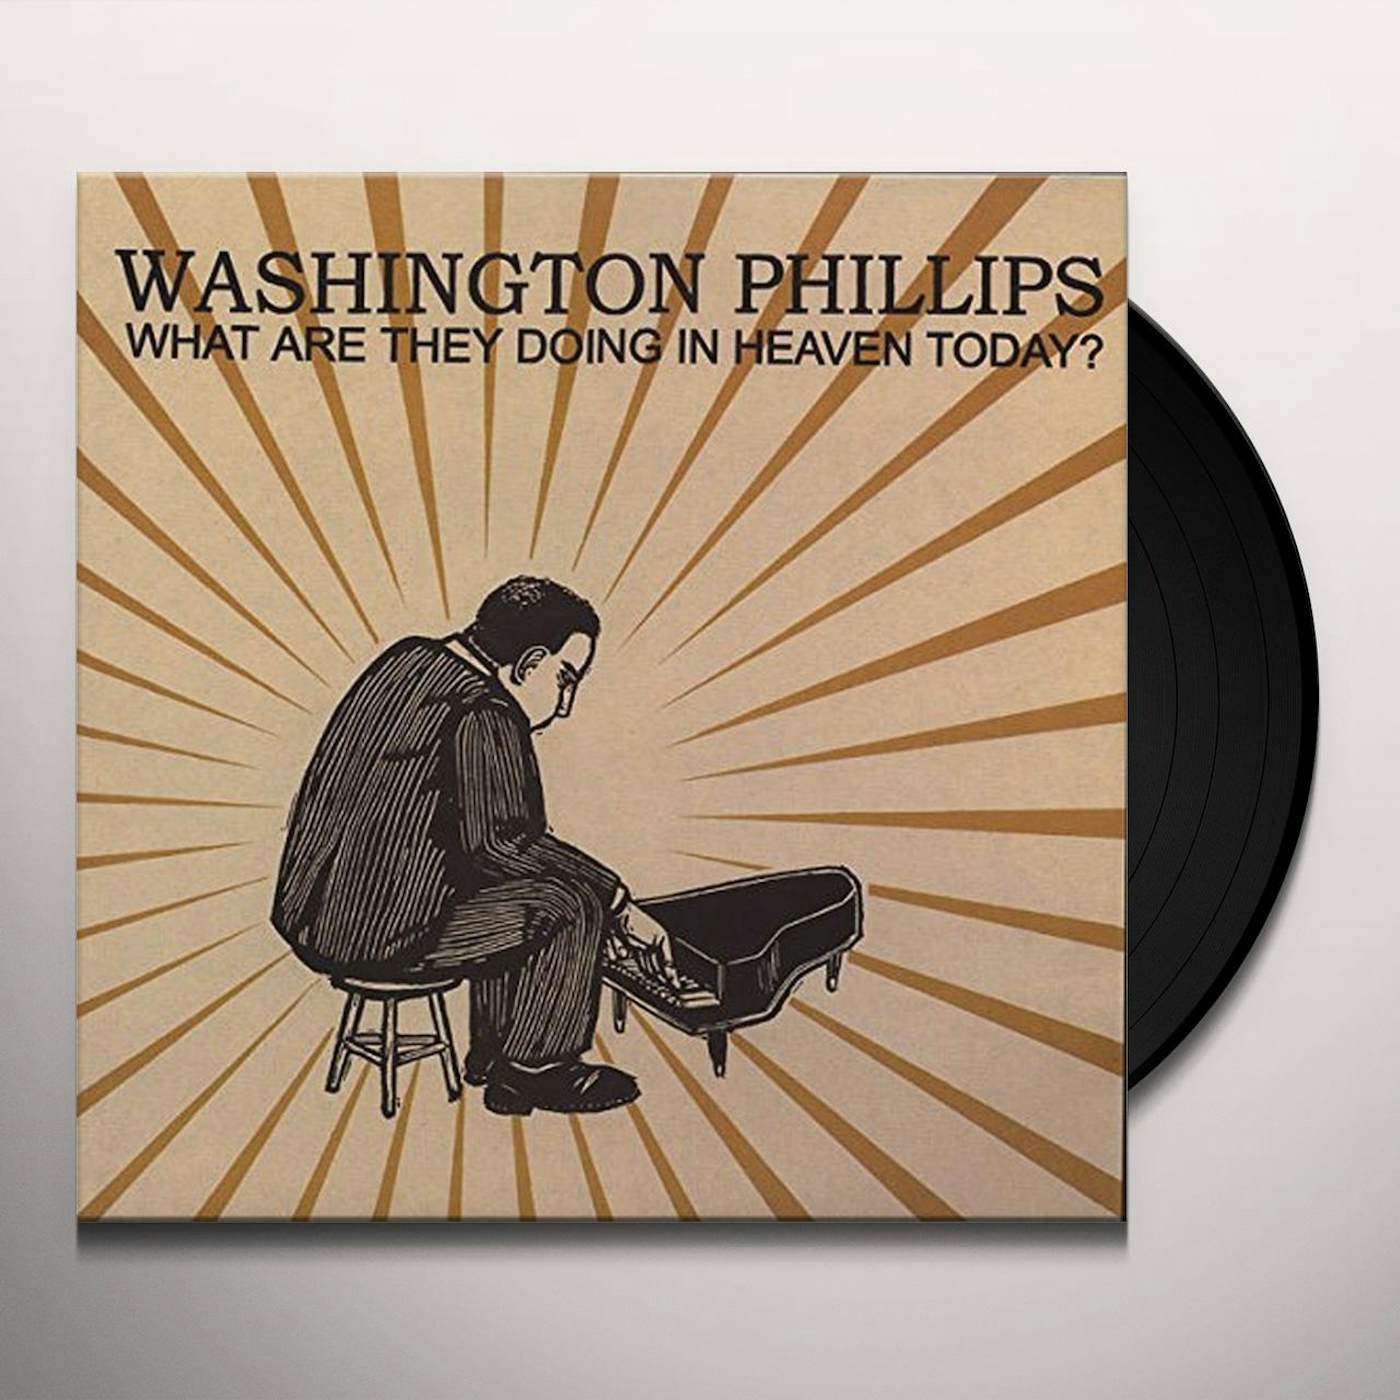 Washington Phillips WHAT ARE THEY DOING IN HEAVEN TODAY Vinyl Record